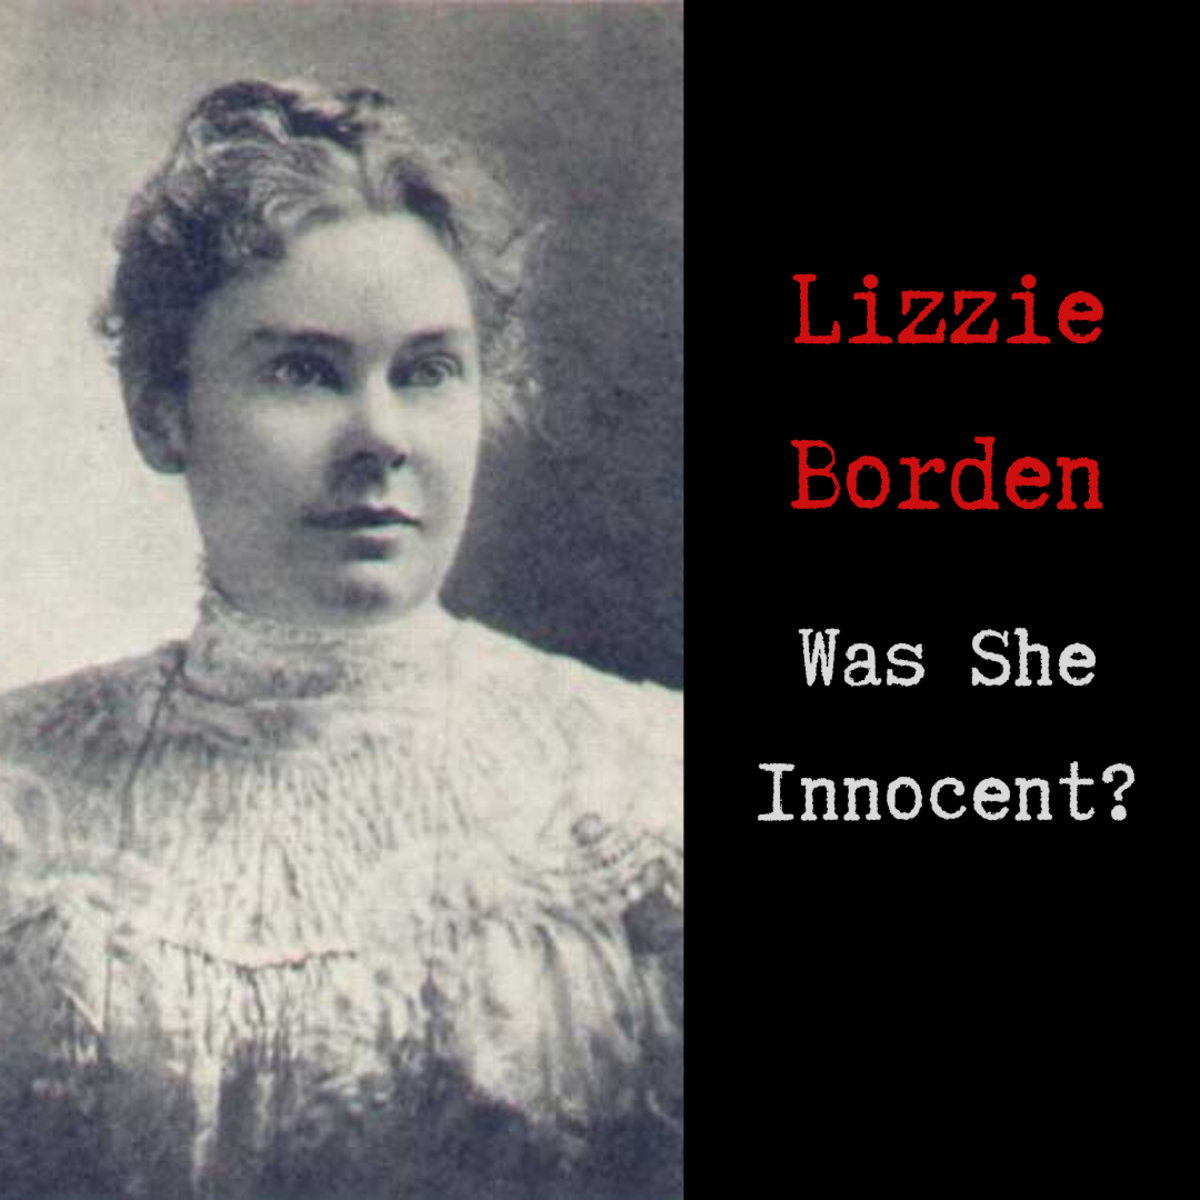 Lizzie Borden was acquitted of murder, but many believed she was actually guilty.